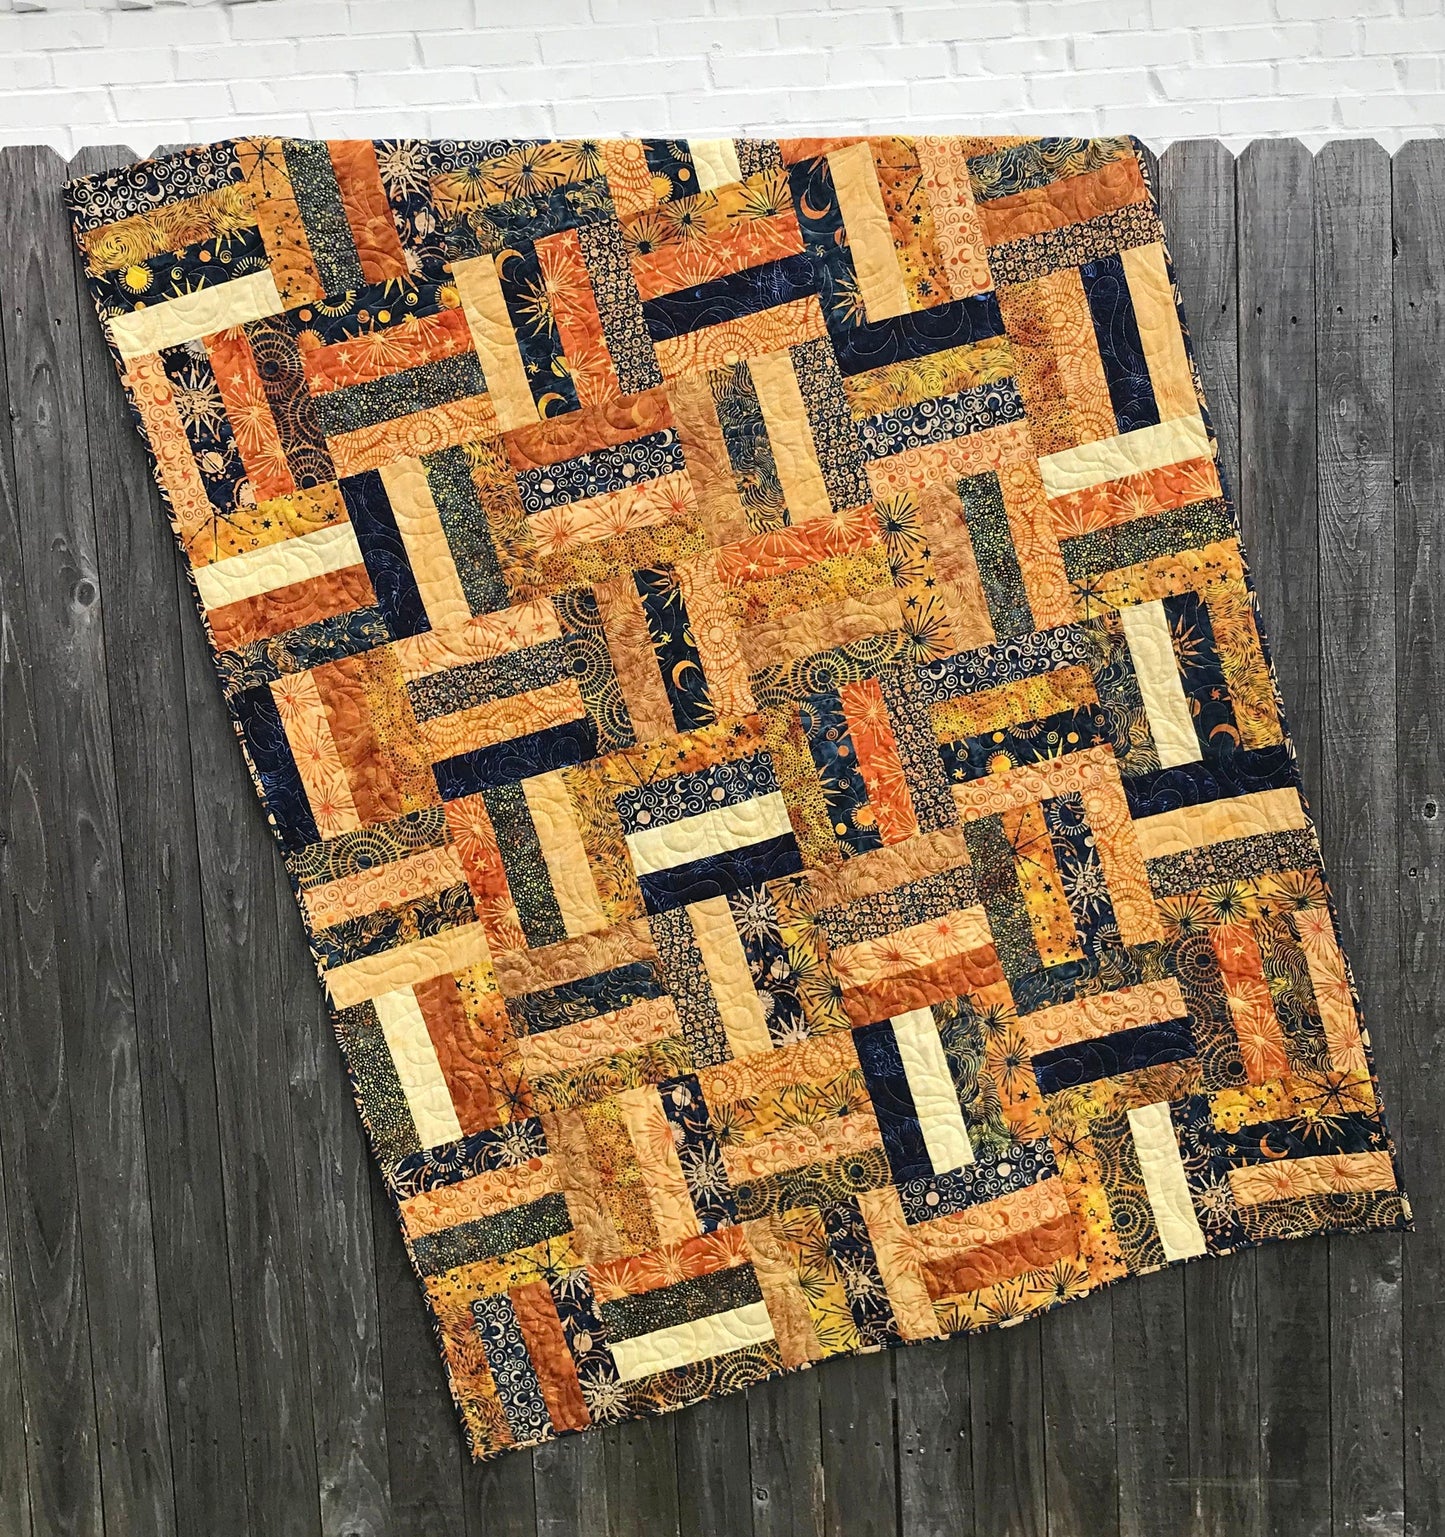 Basketweave Quilt Pattern for Jelly Rolls and Strip Packs - Digital Quilt Pattern - Handmade Quilts, Digital Patterns, and Home Décor items online - Cuddle Cat Quiltworks